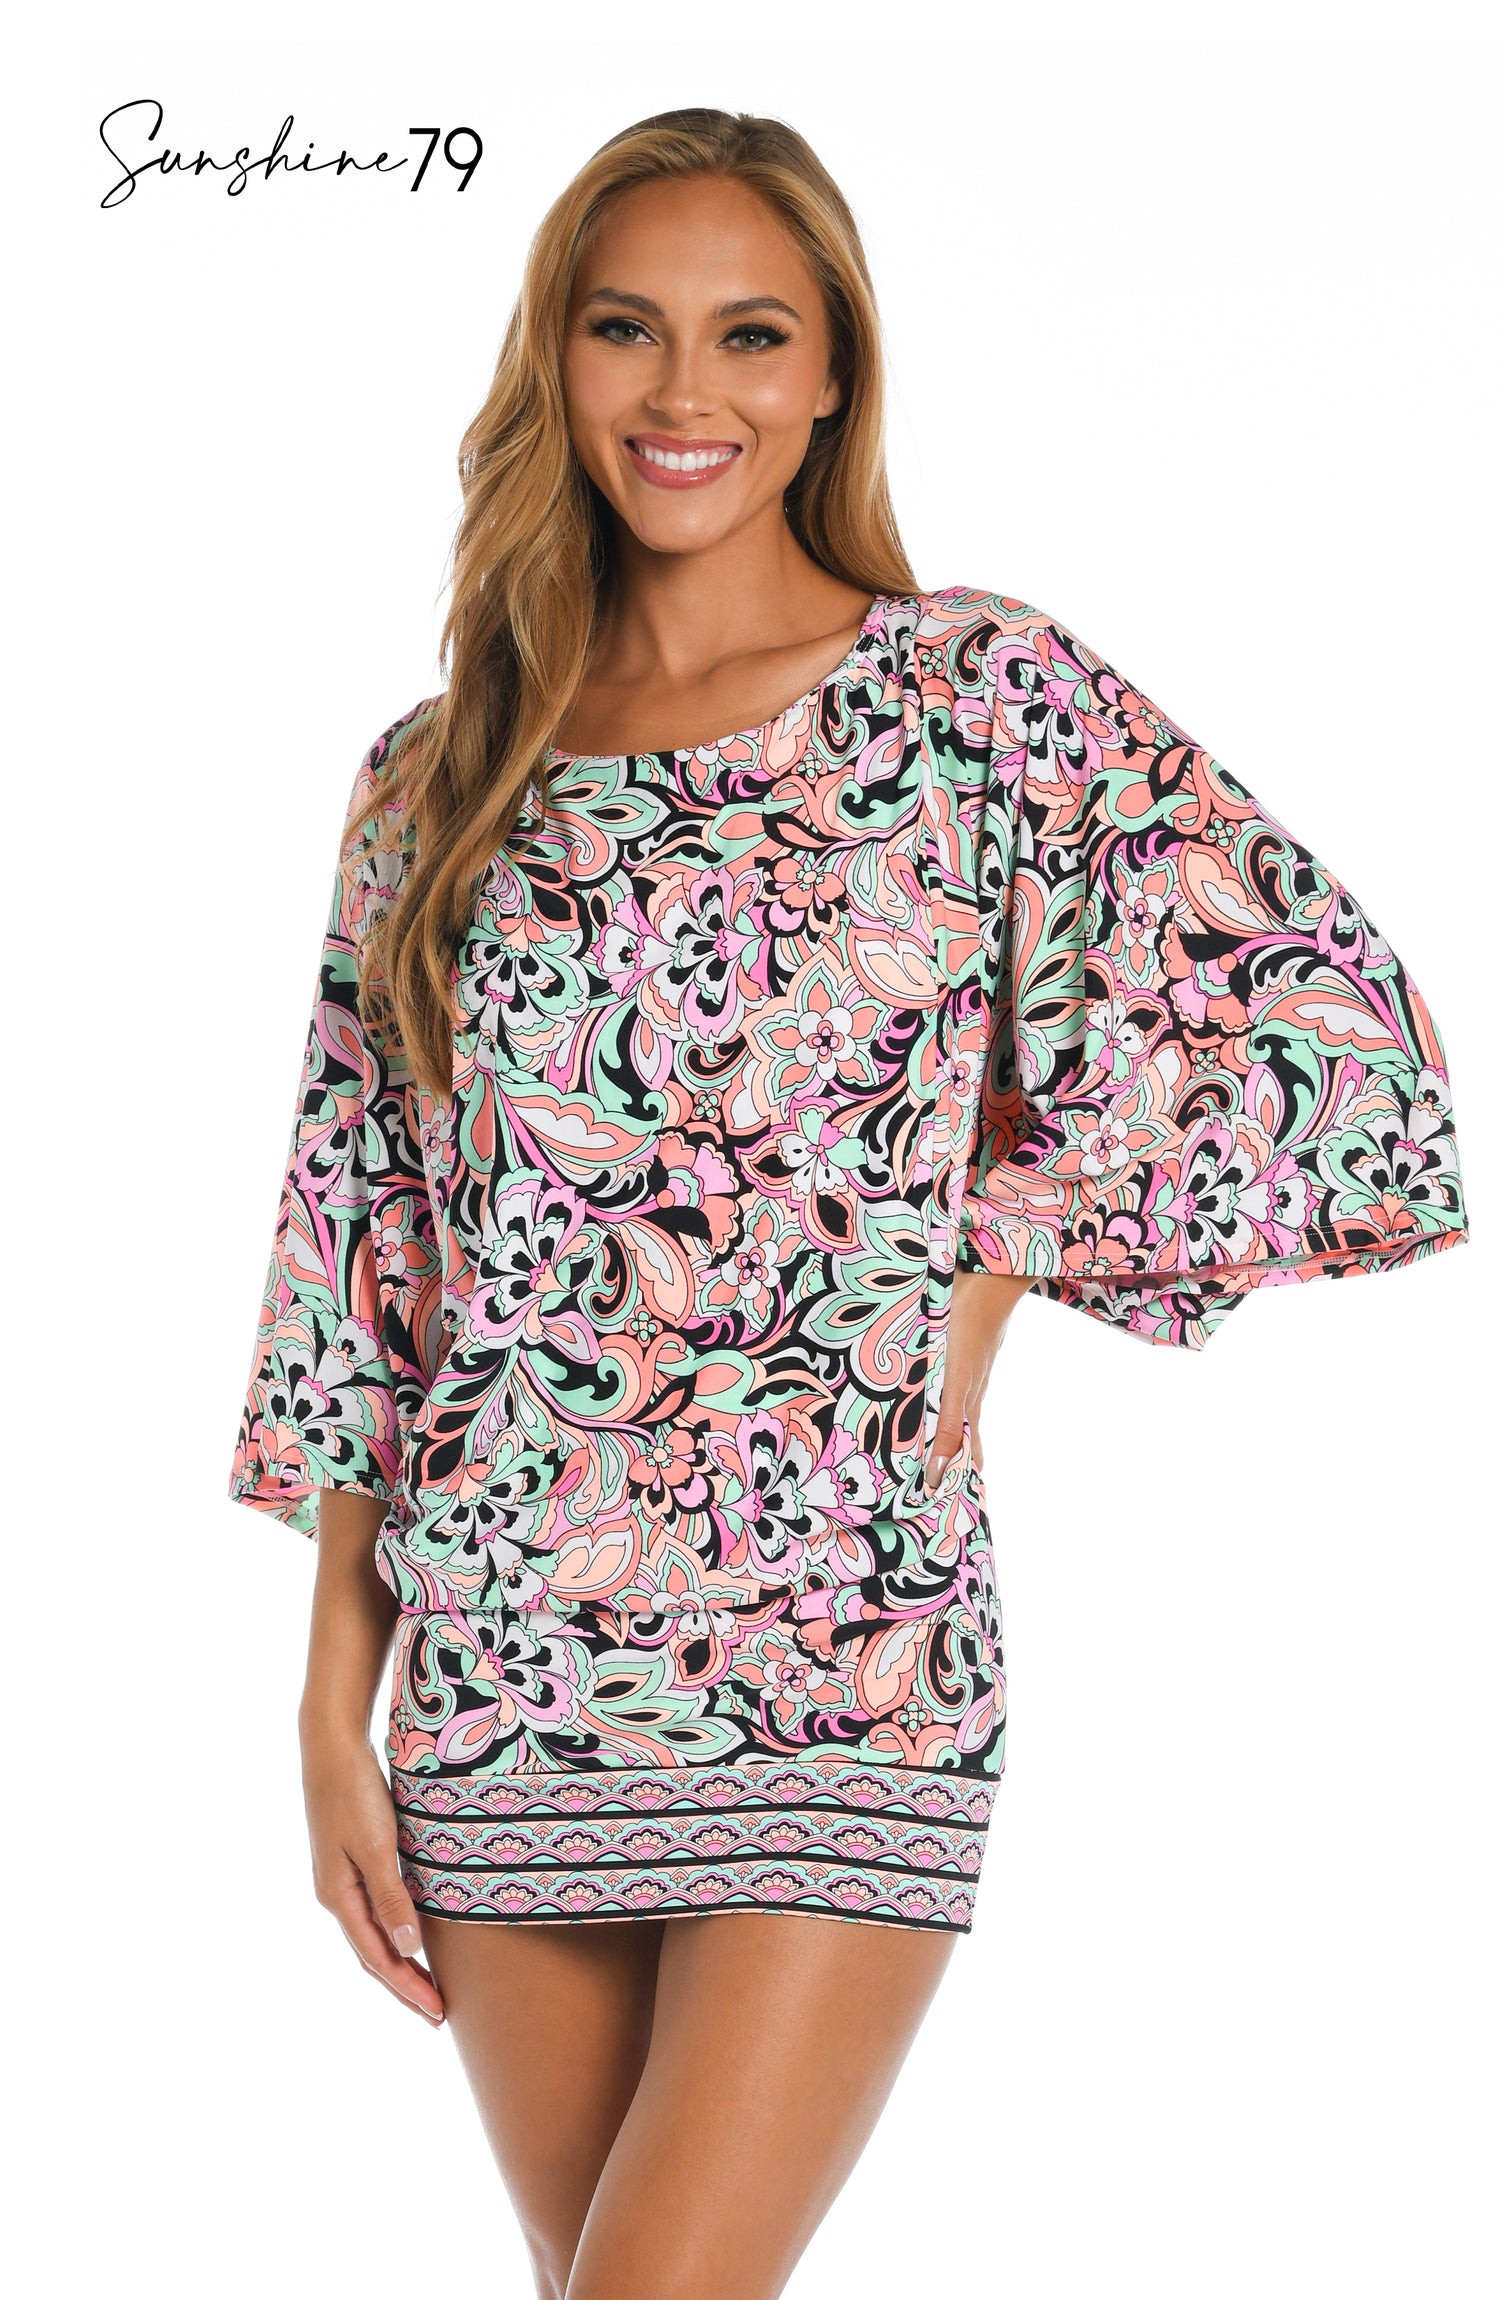 Model is wearing a pink multicolored paisley printed scoop neck tunic cover up from our Sunshine 79 brand.